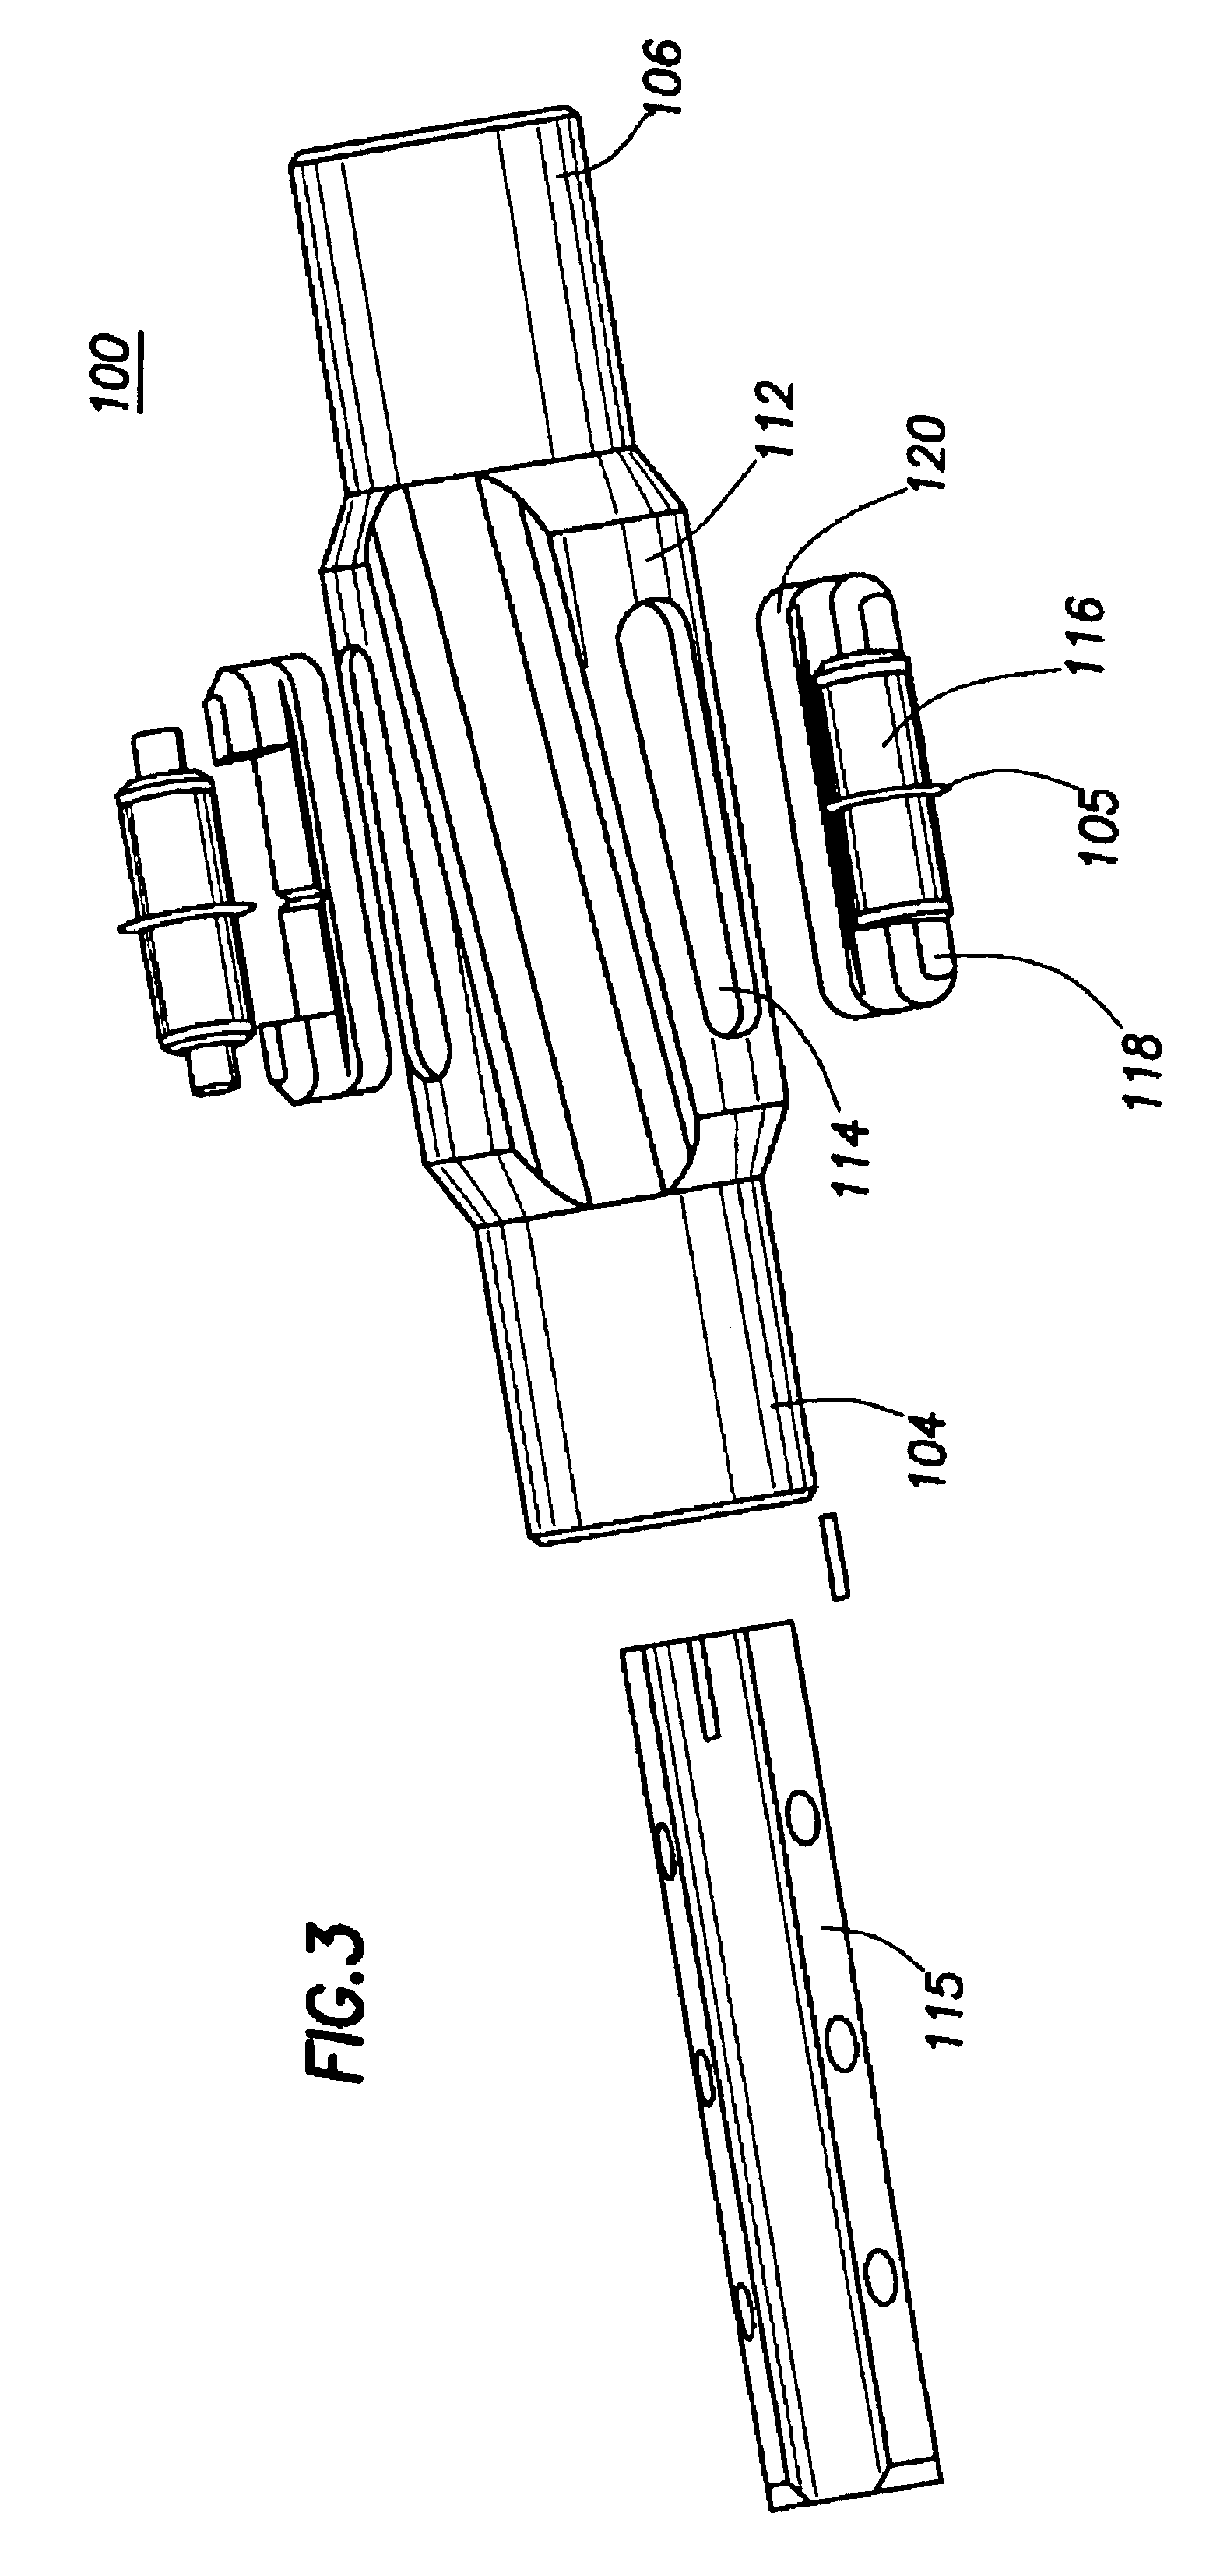 Apparatus and methods for separating and joining tubulars in a wellbore